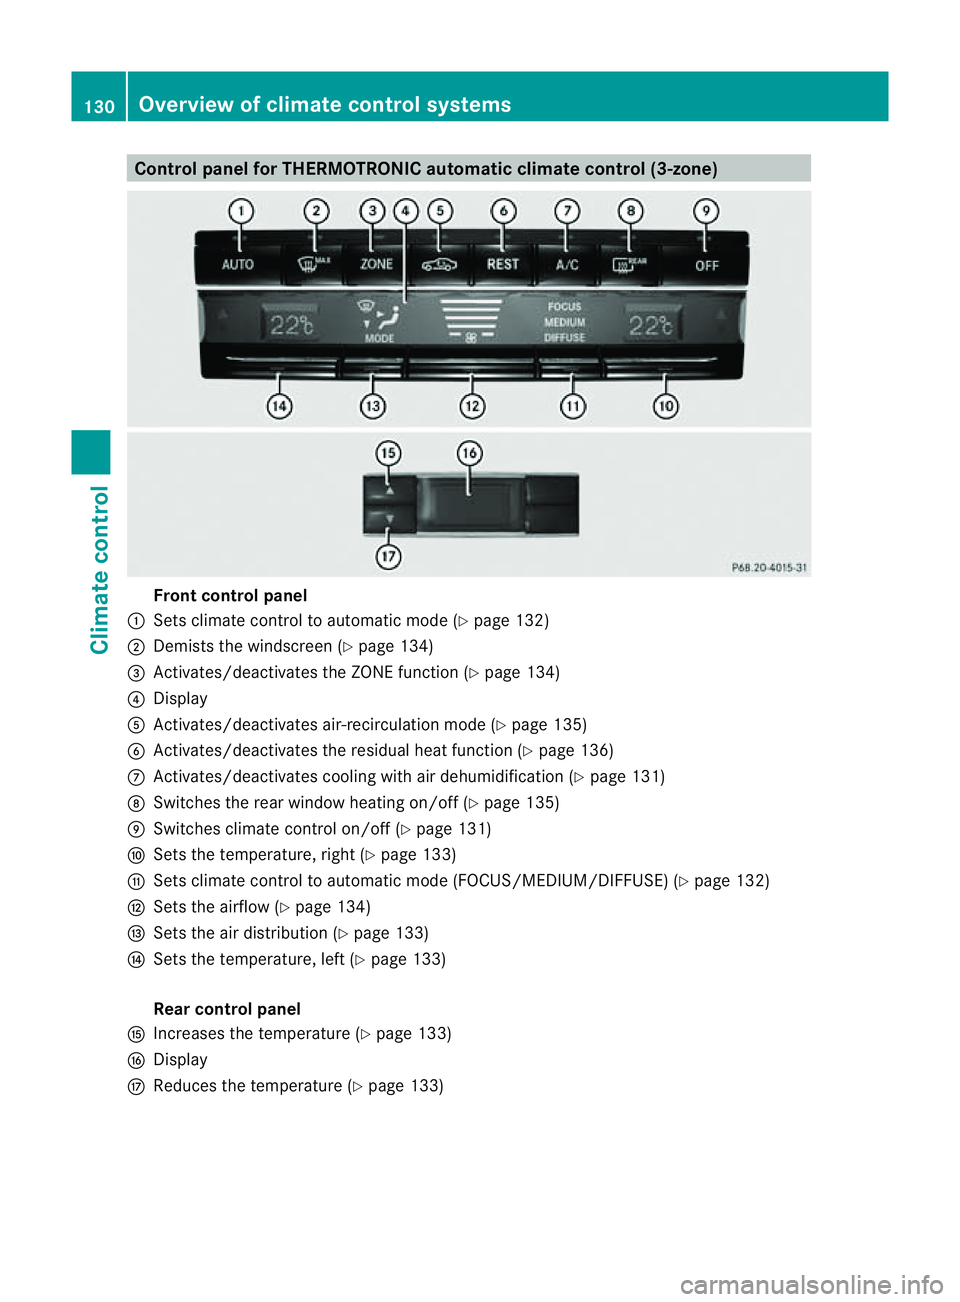 MERCEDES-BENZ E-CLASS CABRIOLET 2011  Owners Manual Control panel for THERMOTRONIC automatic climat
econtrol (3-zone) Fron
tcontrol panel
: Setsclimate control to automatic mode (Y page 132)
; Demist sthe windscreen (Y page 134)
= Activates/deactivates